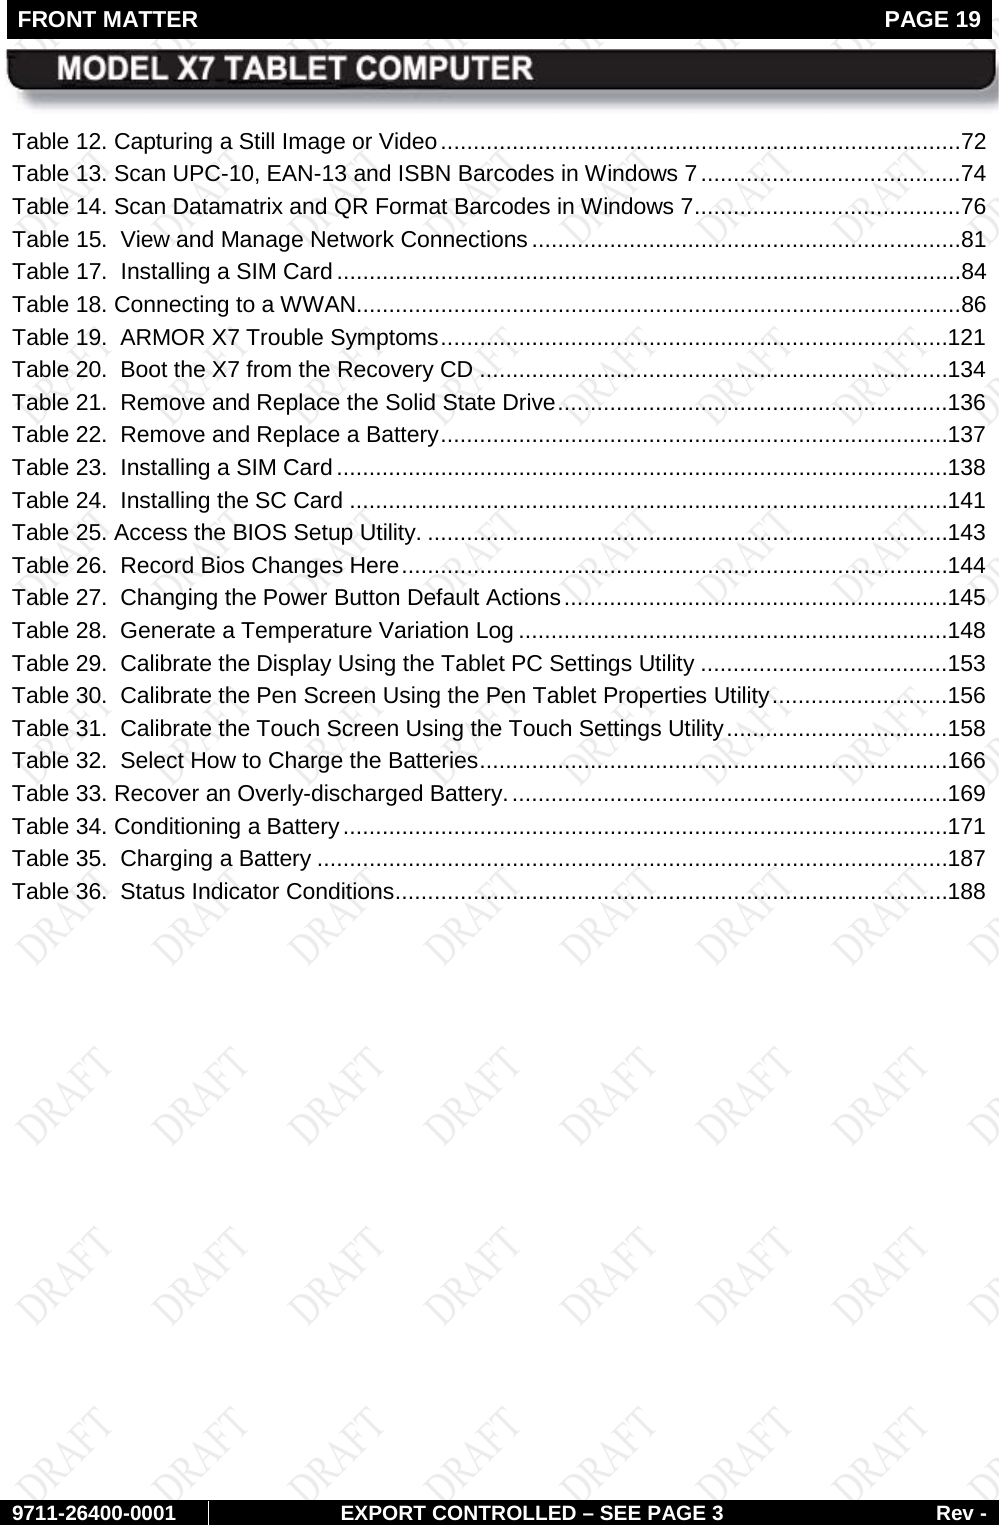 FRONT MATTER   PAGE 19        9711-26400-0001 EXPORT CONTROLLED – SEE PAGE 3 Rev - Table 12. Capturing a Still Image or Video ................................................................................72 Table 13. Scan UPC-10, EAN-13 and ISBN Barcodes in Windows 7 ........................................74 Table 14. Scan Datamatrix and QR Format Barcodes in Windows 7 .........................................76 Table 15.  View and Manage Network Connections ..................................................................81 Table 17.  Installing a SIM Card ................................................................................................84 Table 18. Connecting to a WWAN.............................................................................................86 Table 19.  ARMOR X7 Trouble Symptoms .............................................................................. 121 Table 20.  Boot the X7 from the Recovery CD ........................................................................ 134 Table 21.  Remove and Replace the Solid State Drive ............................................................ 136 Table 22.  Remove and Replace a Battery .............................................................................. 137 Table 23.  Installing a SIM Card .............................................................................................. 138 Table 24.  Installing the SC Card ............................................................................................ 141 Table 25. Access the BIOS Setup Utility. ................................................................................ 143 Table 26.  Record Bios Changes Here .................................................................................... 144 Table 27.  Changing the Power Button Default Actions ........................................................... 145 Table 28.  Generate a Temperature Variation Log .................................................................. 148 Table 29.  Calibrate the Display Using the Tablet PC Settings Utility ...................................... 153 Table 30.  Calibrate the Pen Screen Using the Pen Tablet Properties Utility ........................... 156 Table 31.  Calibrate the Touch Screen Using the Touch Settings Utility .................................. 158 Table 32.  Select How to Charge the Batteries ........................................................................ 166 Table 33. Recover an Overly-discharged Battery. ................................................................... 169 Table 34. Conditioning a Battery ............................................................................................. 171 Table 35.  Charging a Battery ................................................................................................. 187 Table 36.  Status Indicator Conditions ..................................................................................... 188    